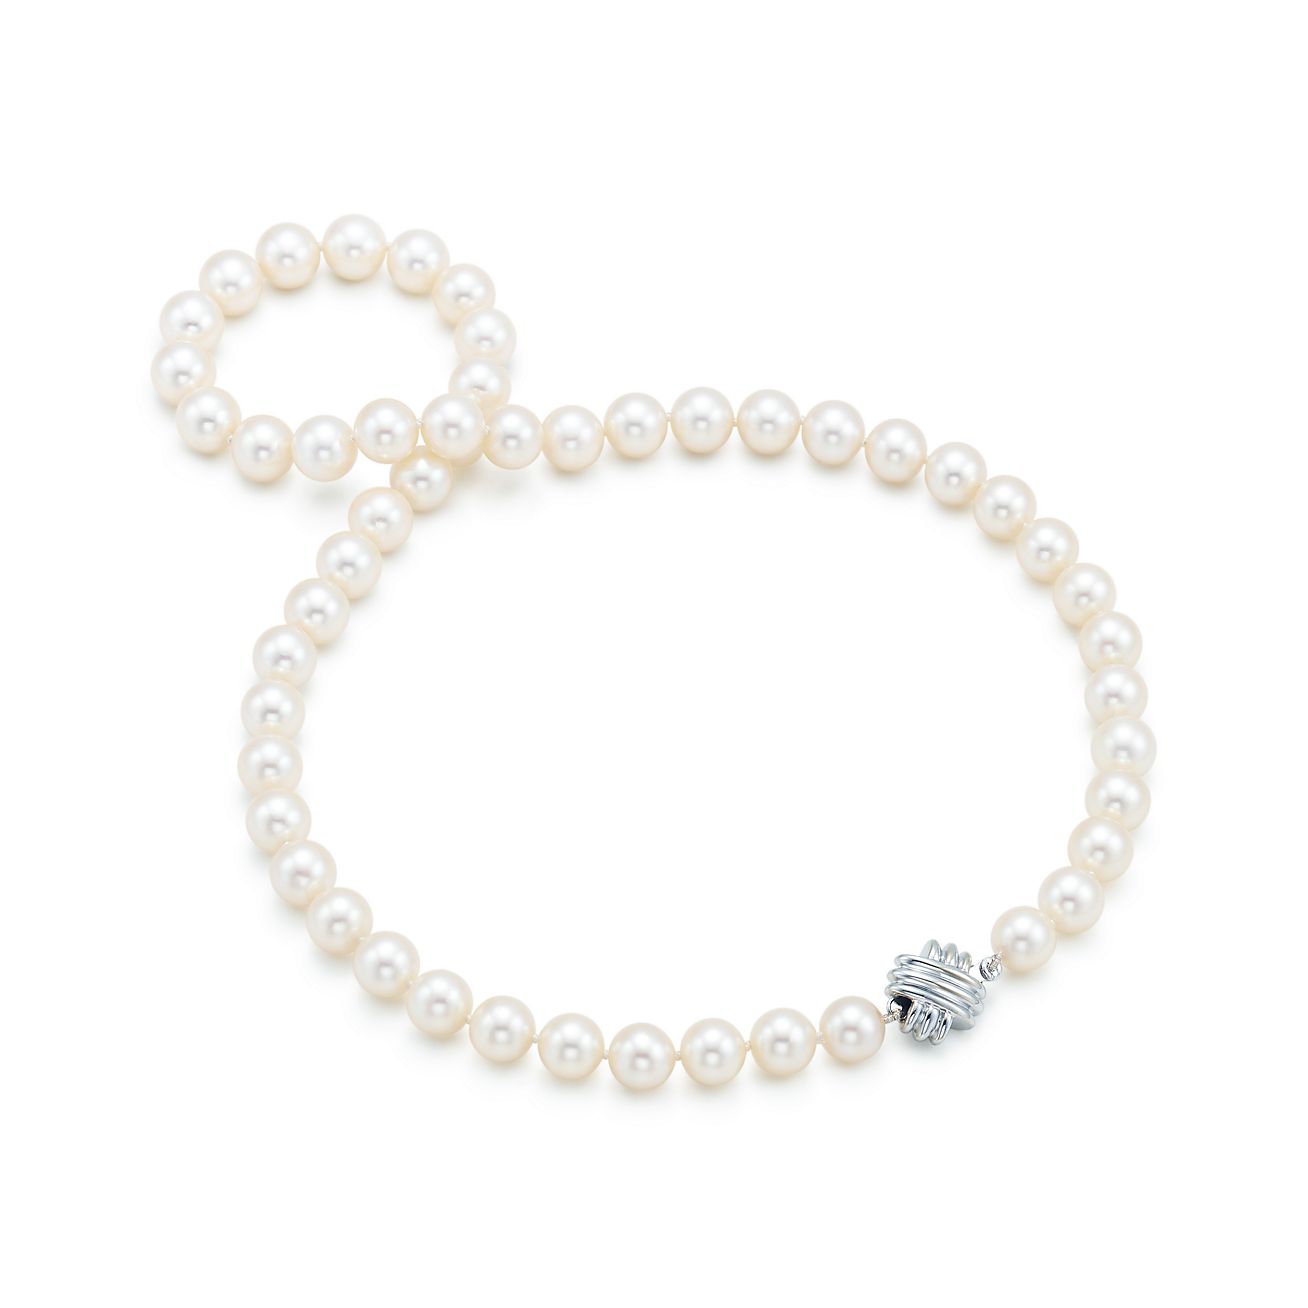 Tiffany Signature® Pearls necklace of 